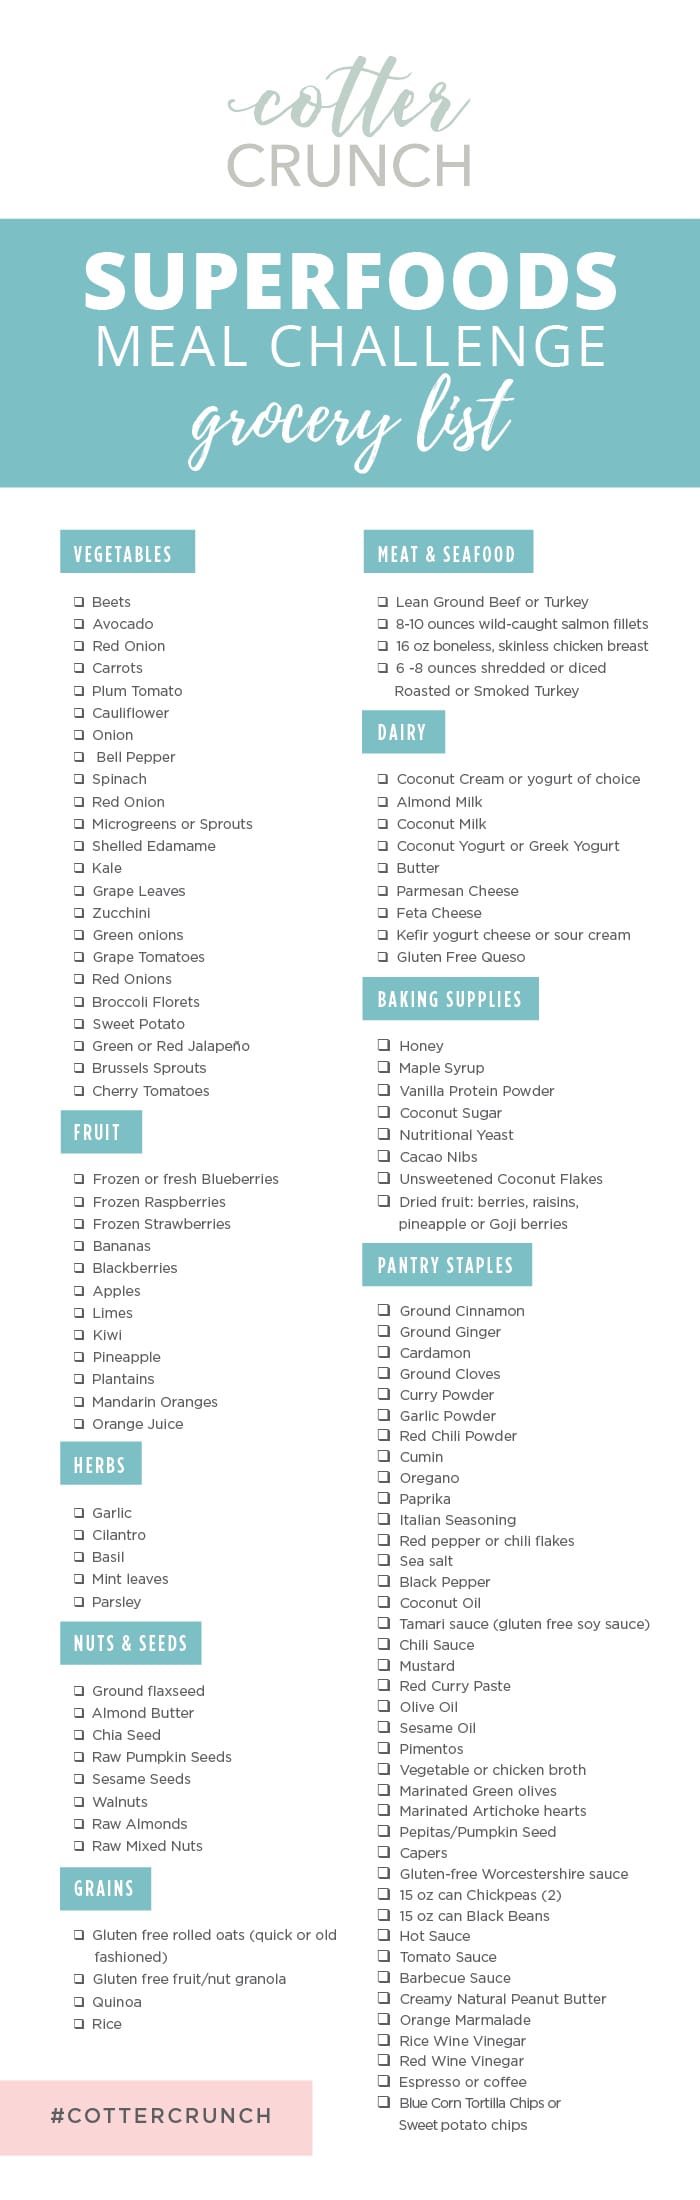 Printable grocery list for Superfoods Meal Challenge